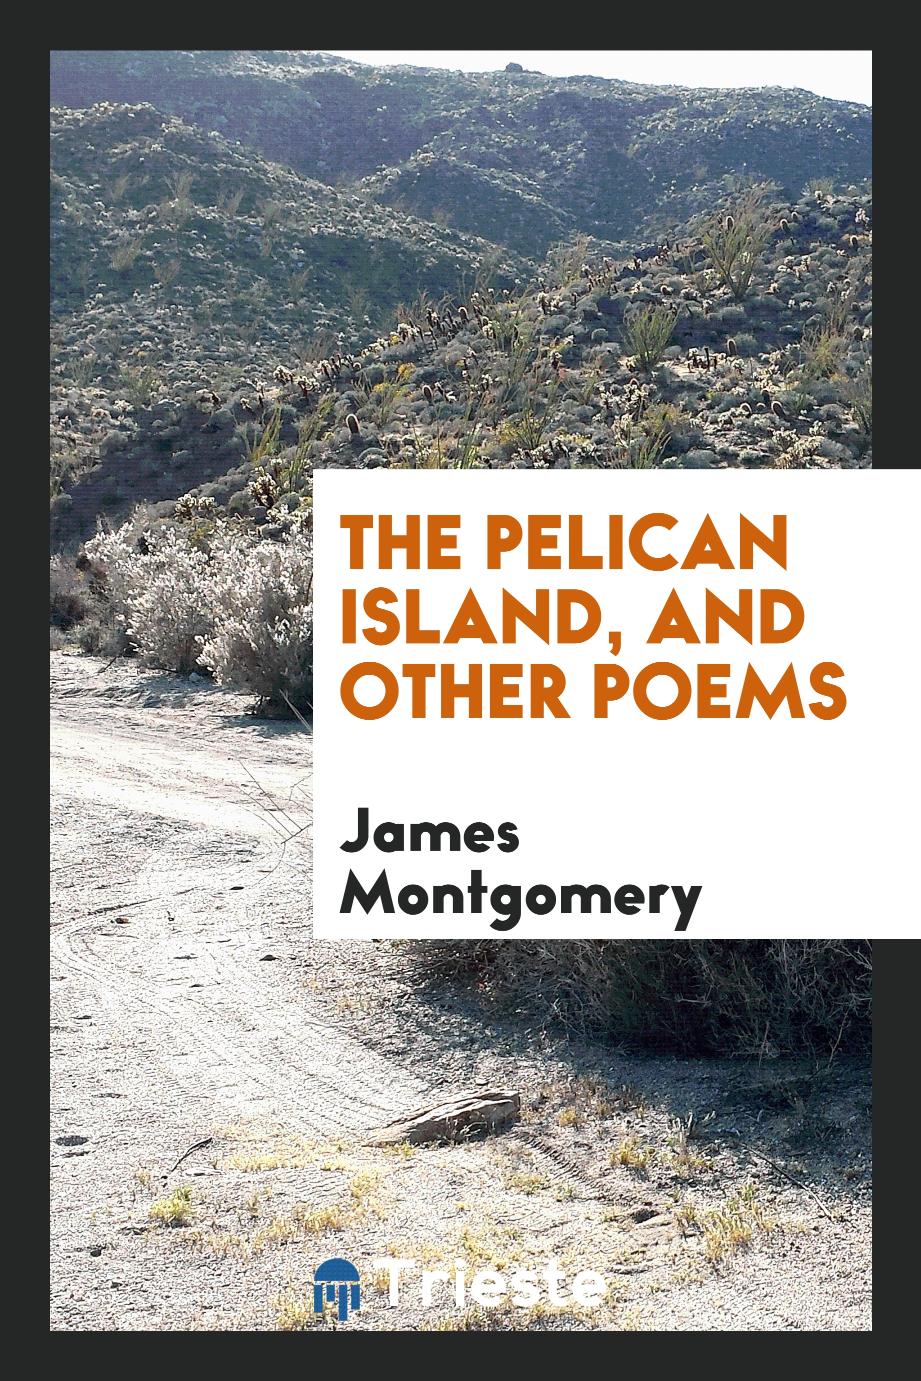 The Pelican Island, and other poems